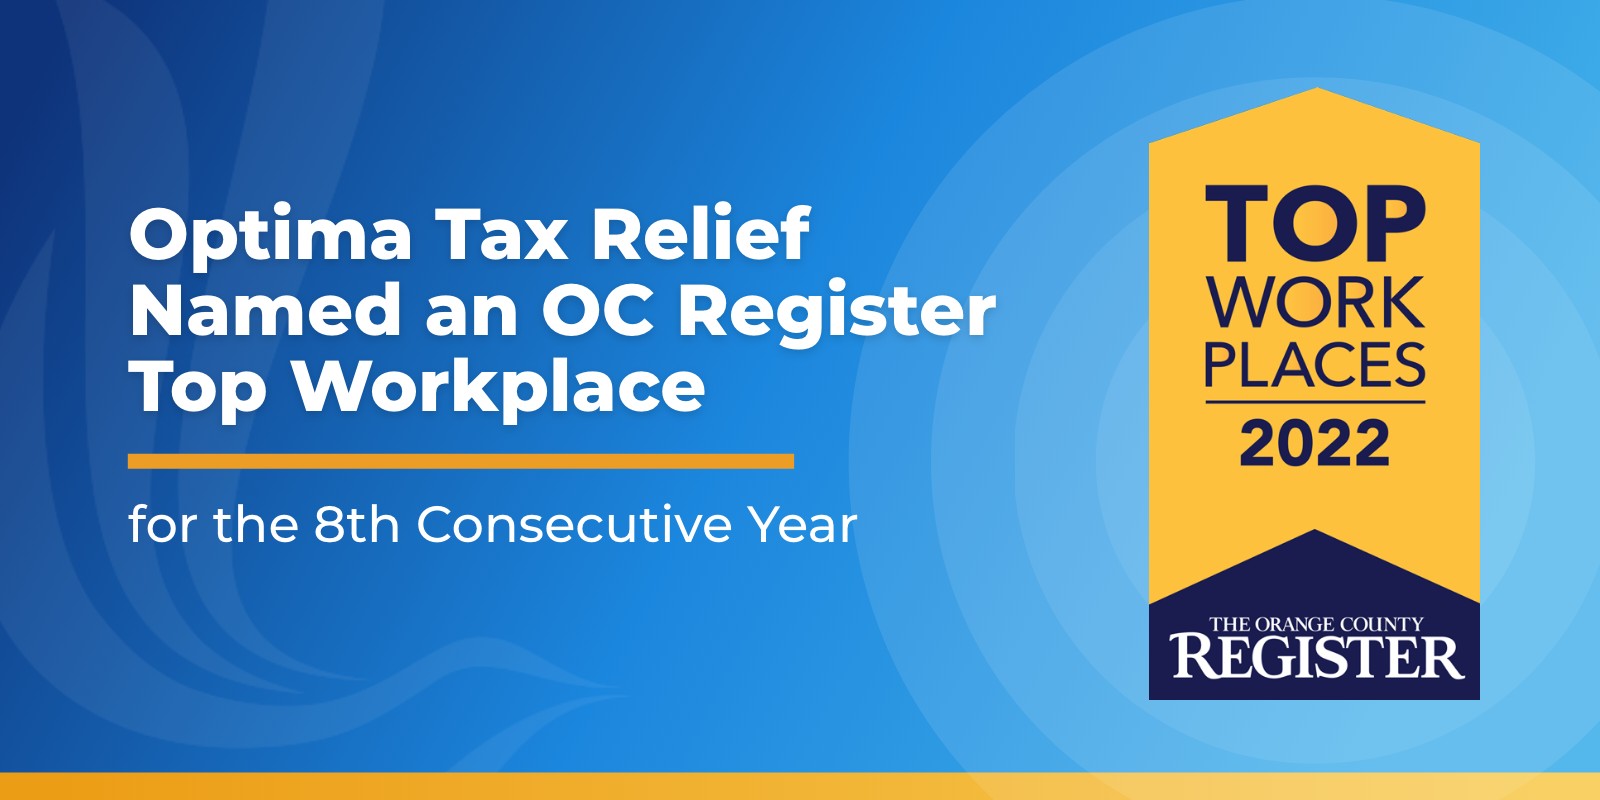 Optima Tax Relief Named an Orange County Top Workplace Winner for the Eighth Consecutive Year 